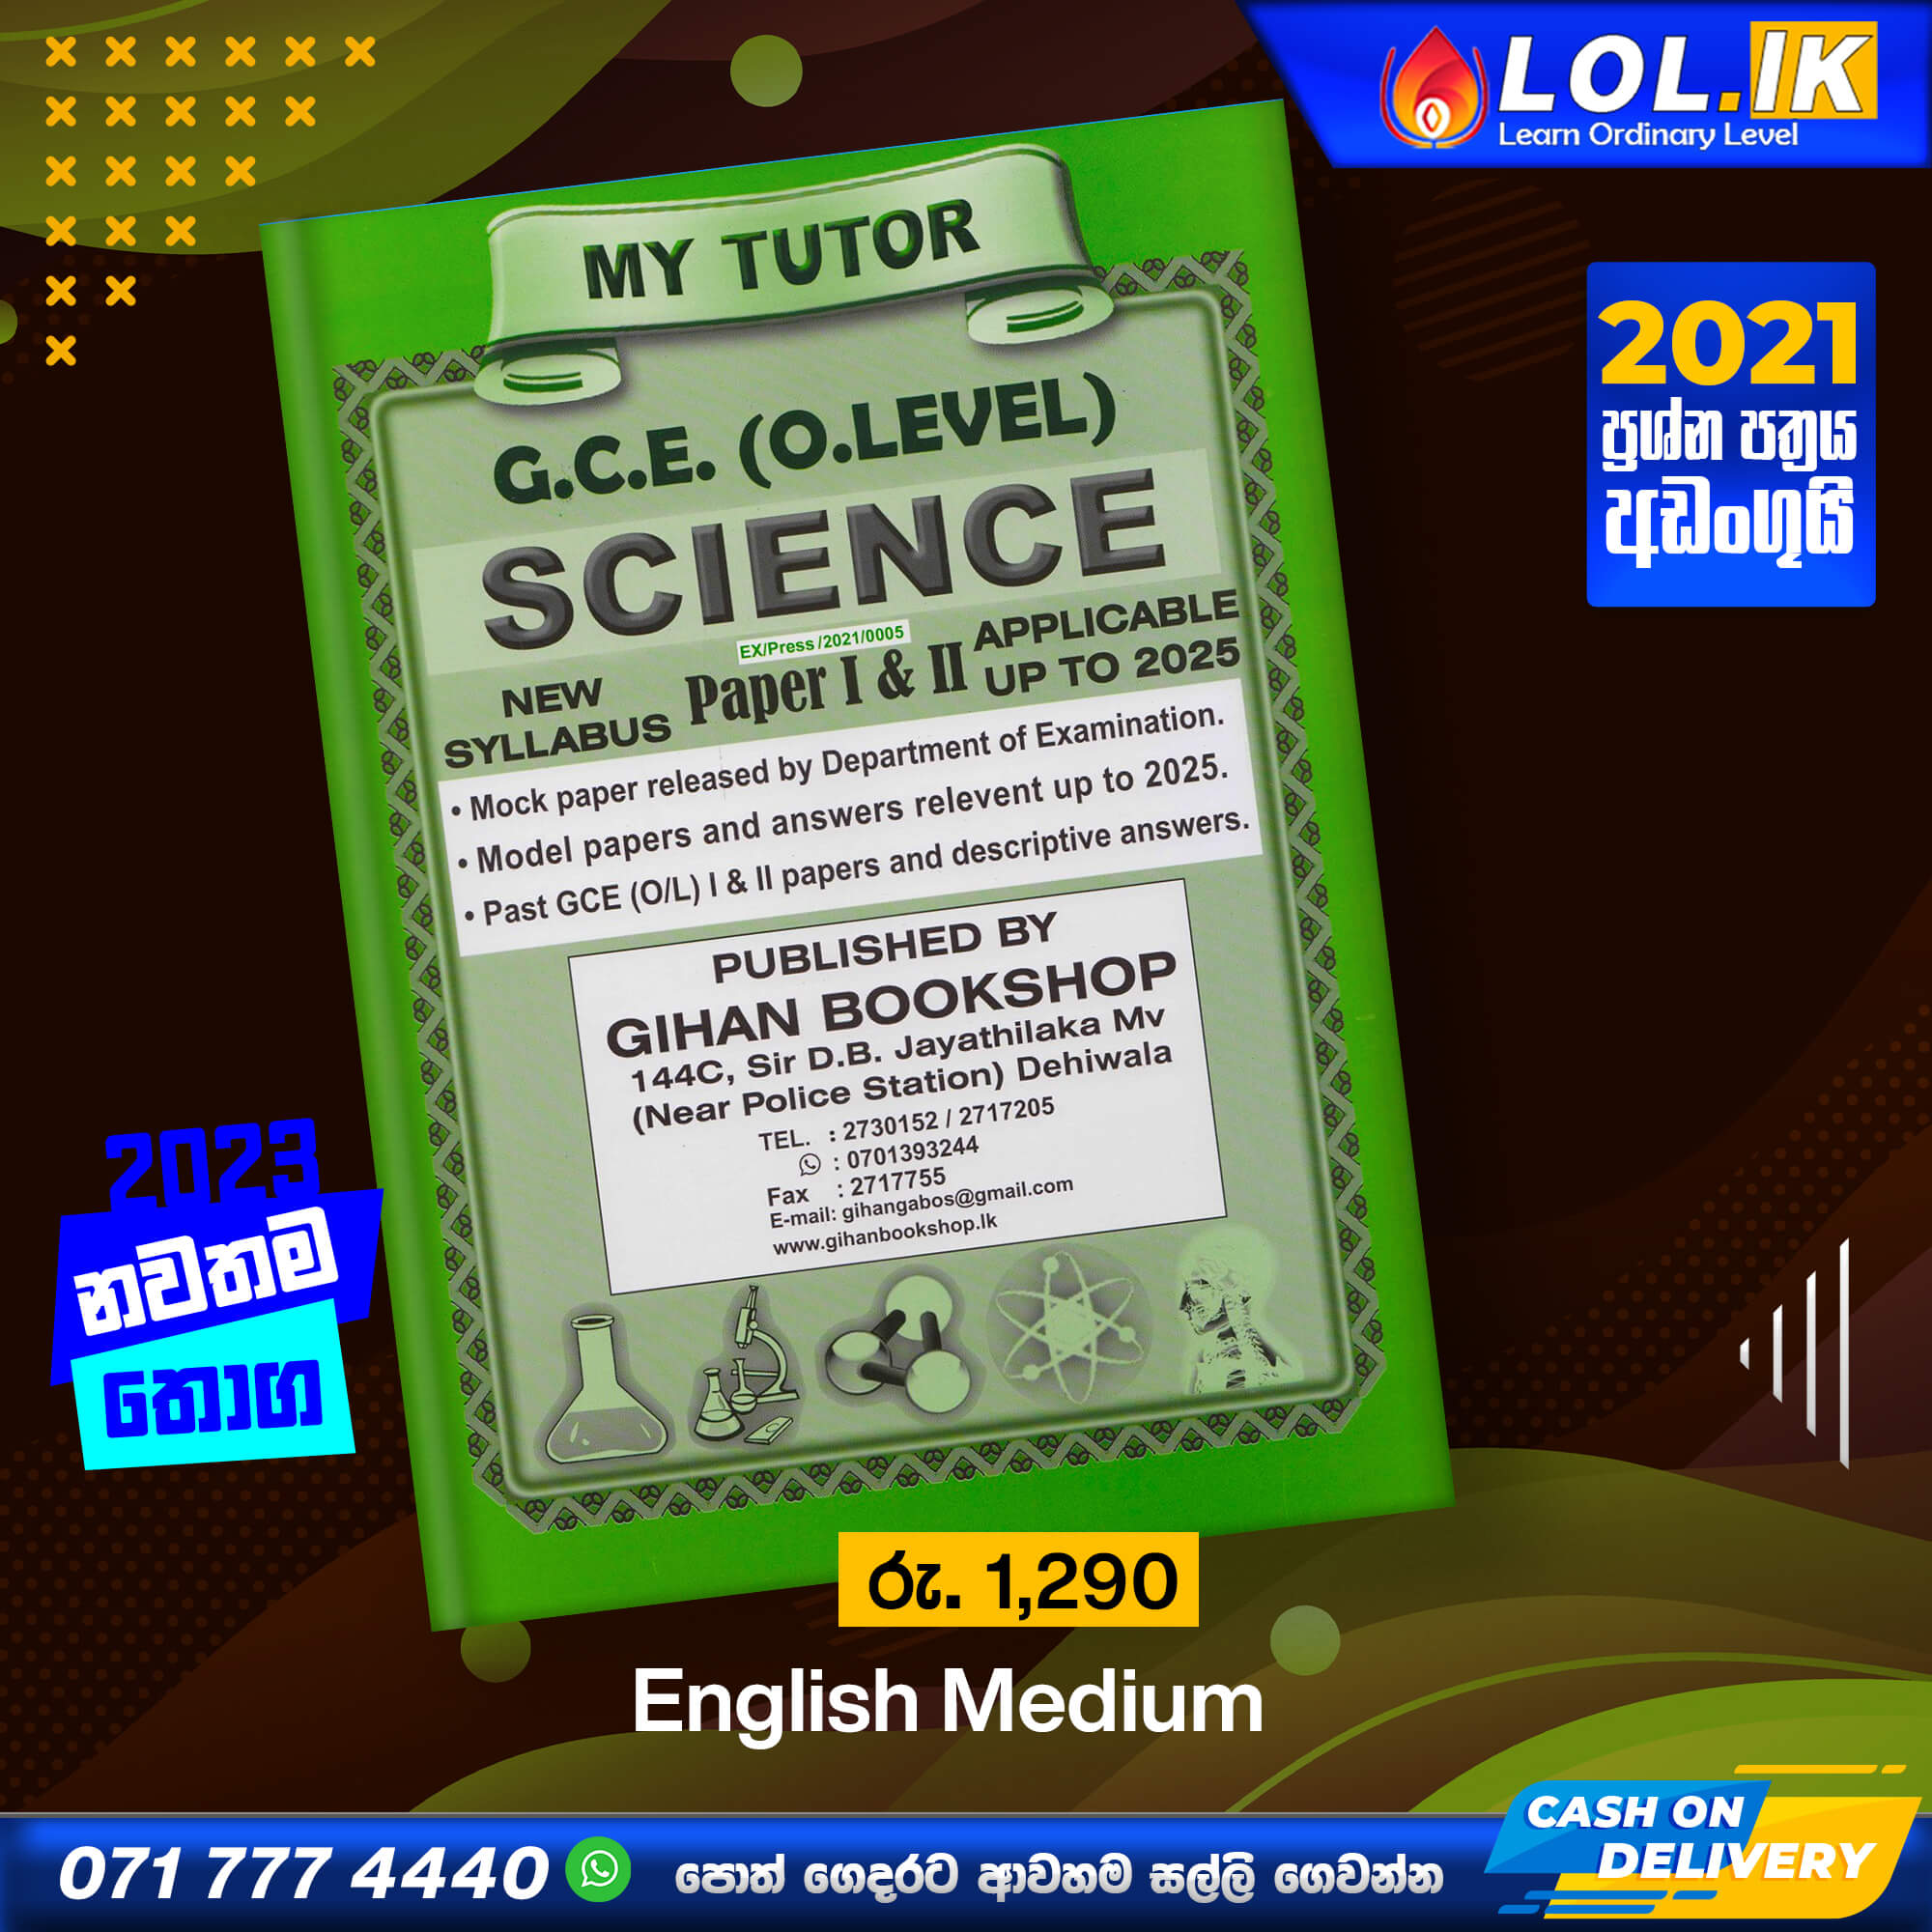 English Medium O/L SCIENCE Past Papers Book